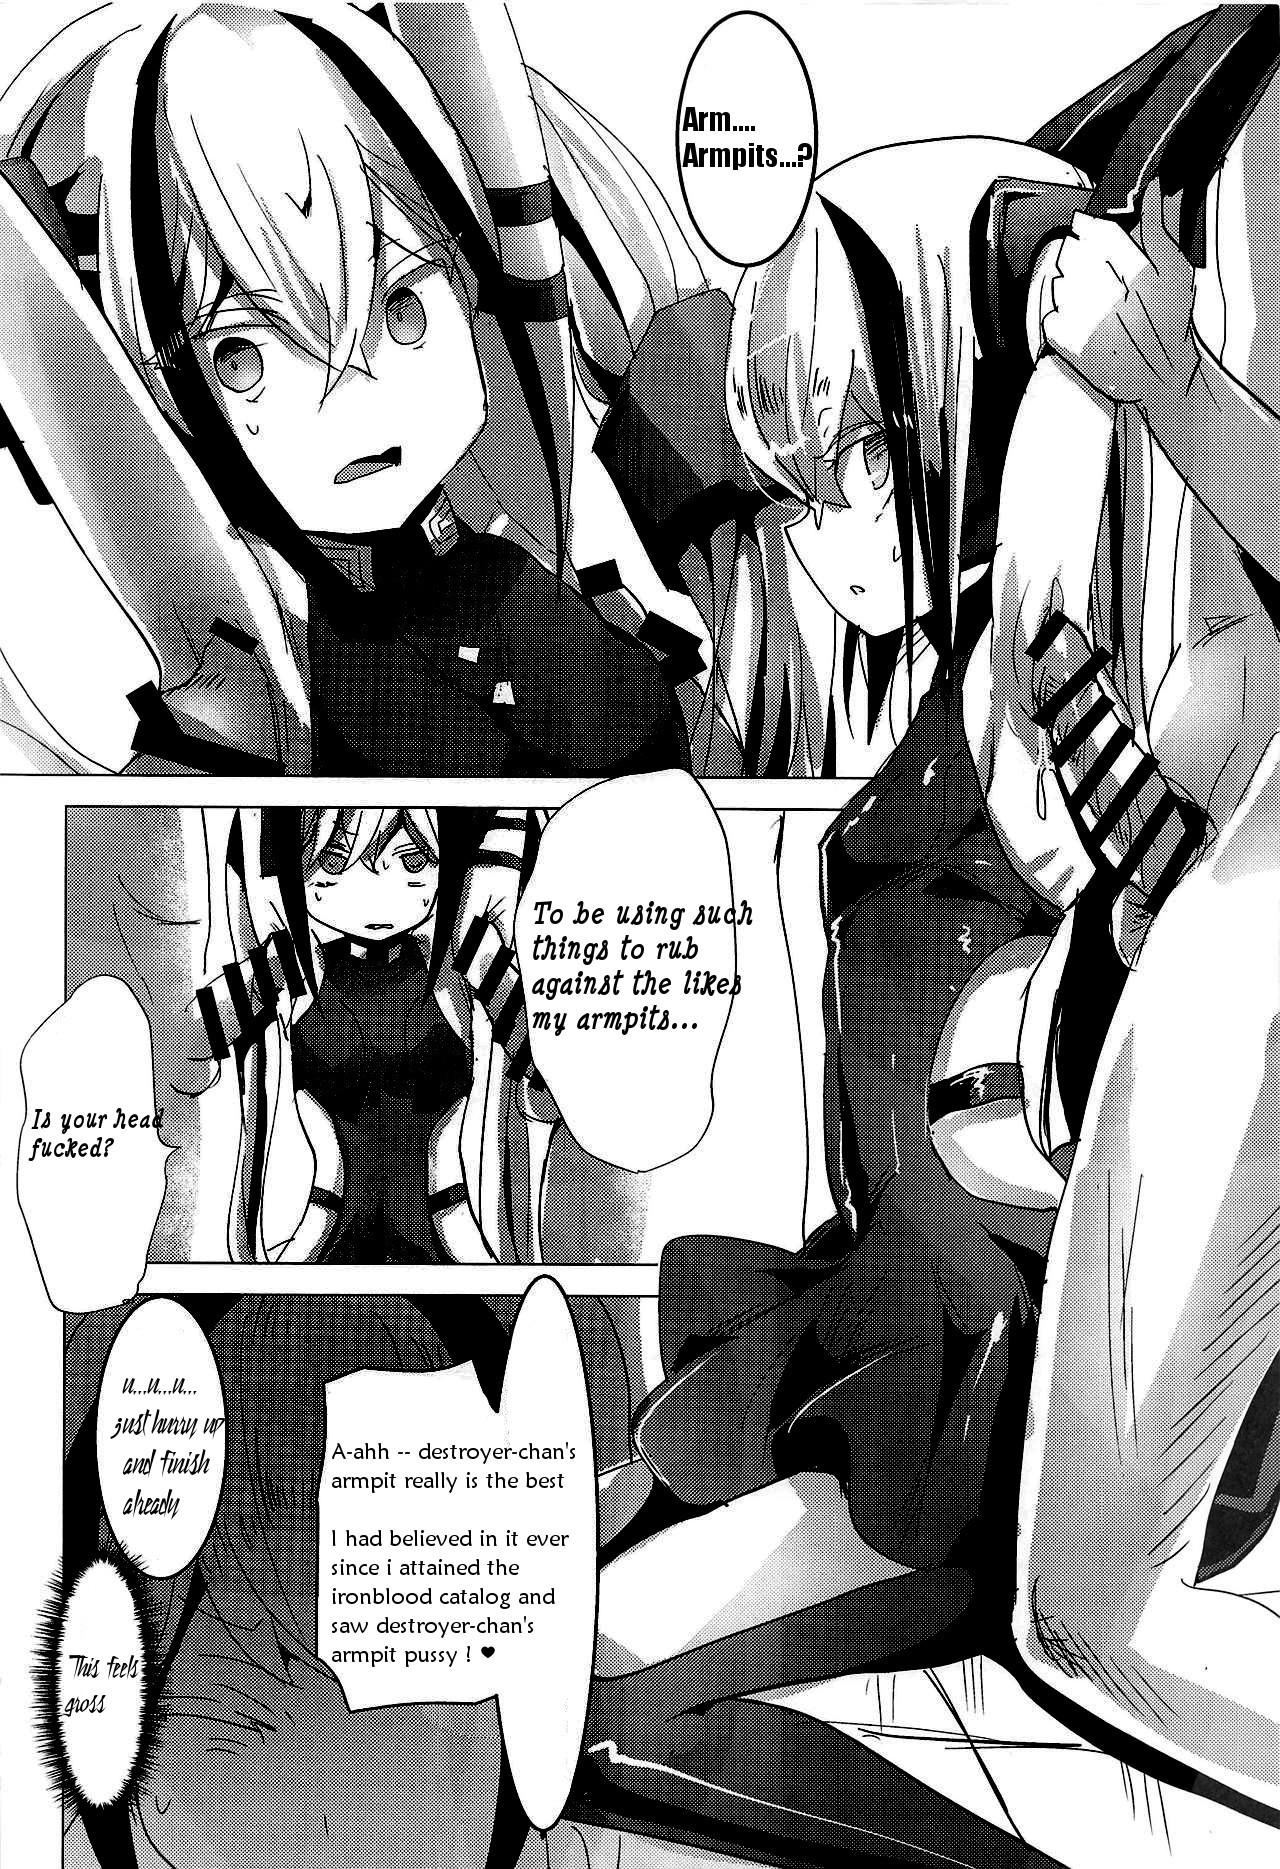 Best Blowjobs Ever Miserable Dolls - Girls frontline Wetpussy - Page 7